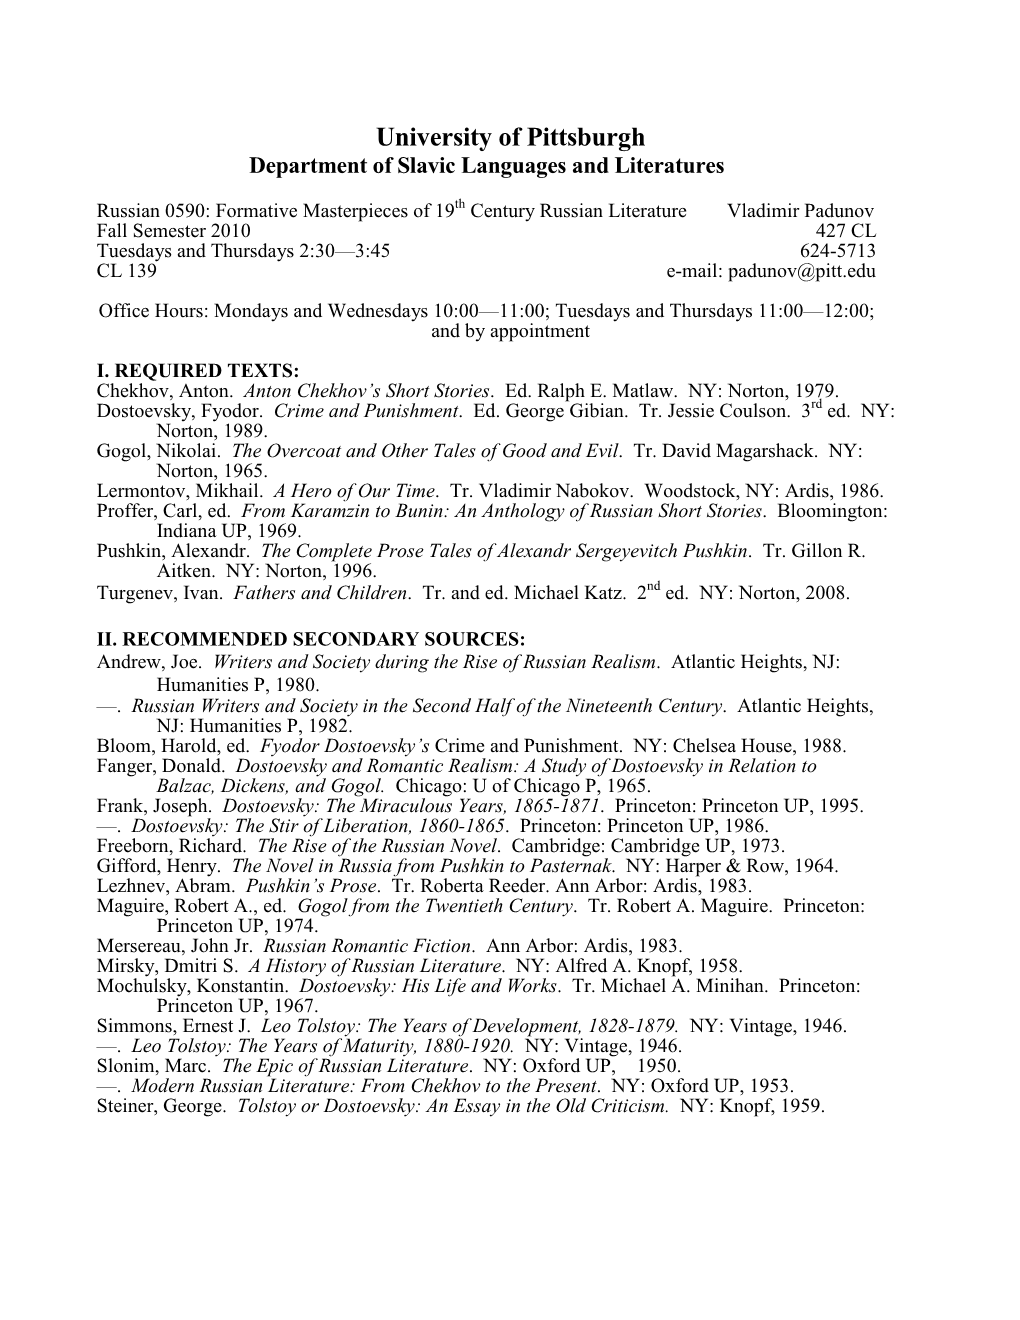 University of Pittsburgh Department of Slavic Languages and Literatures